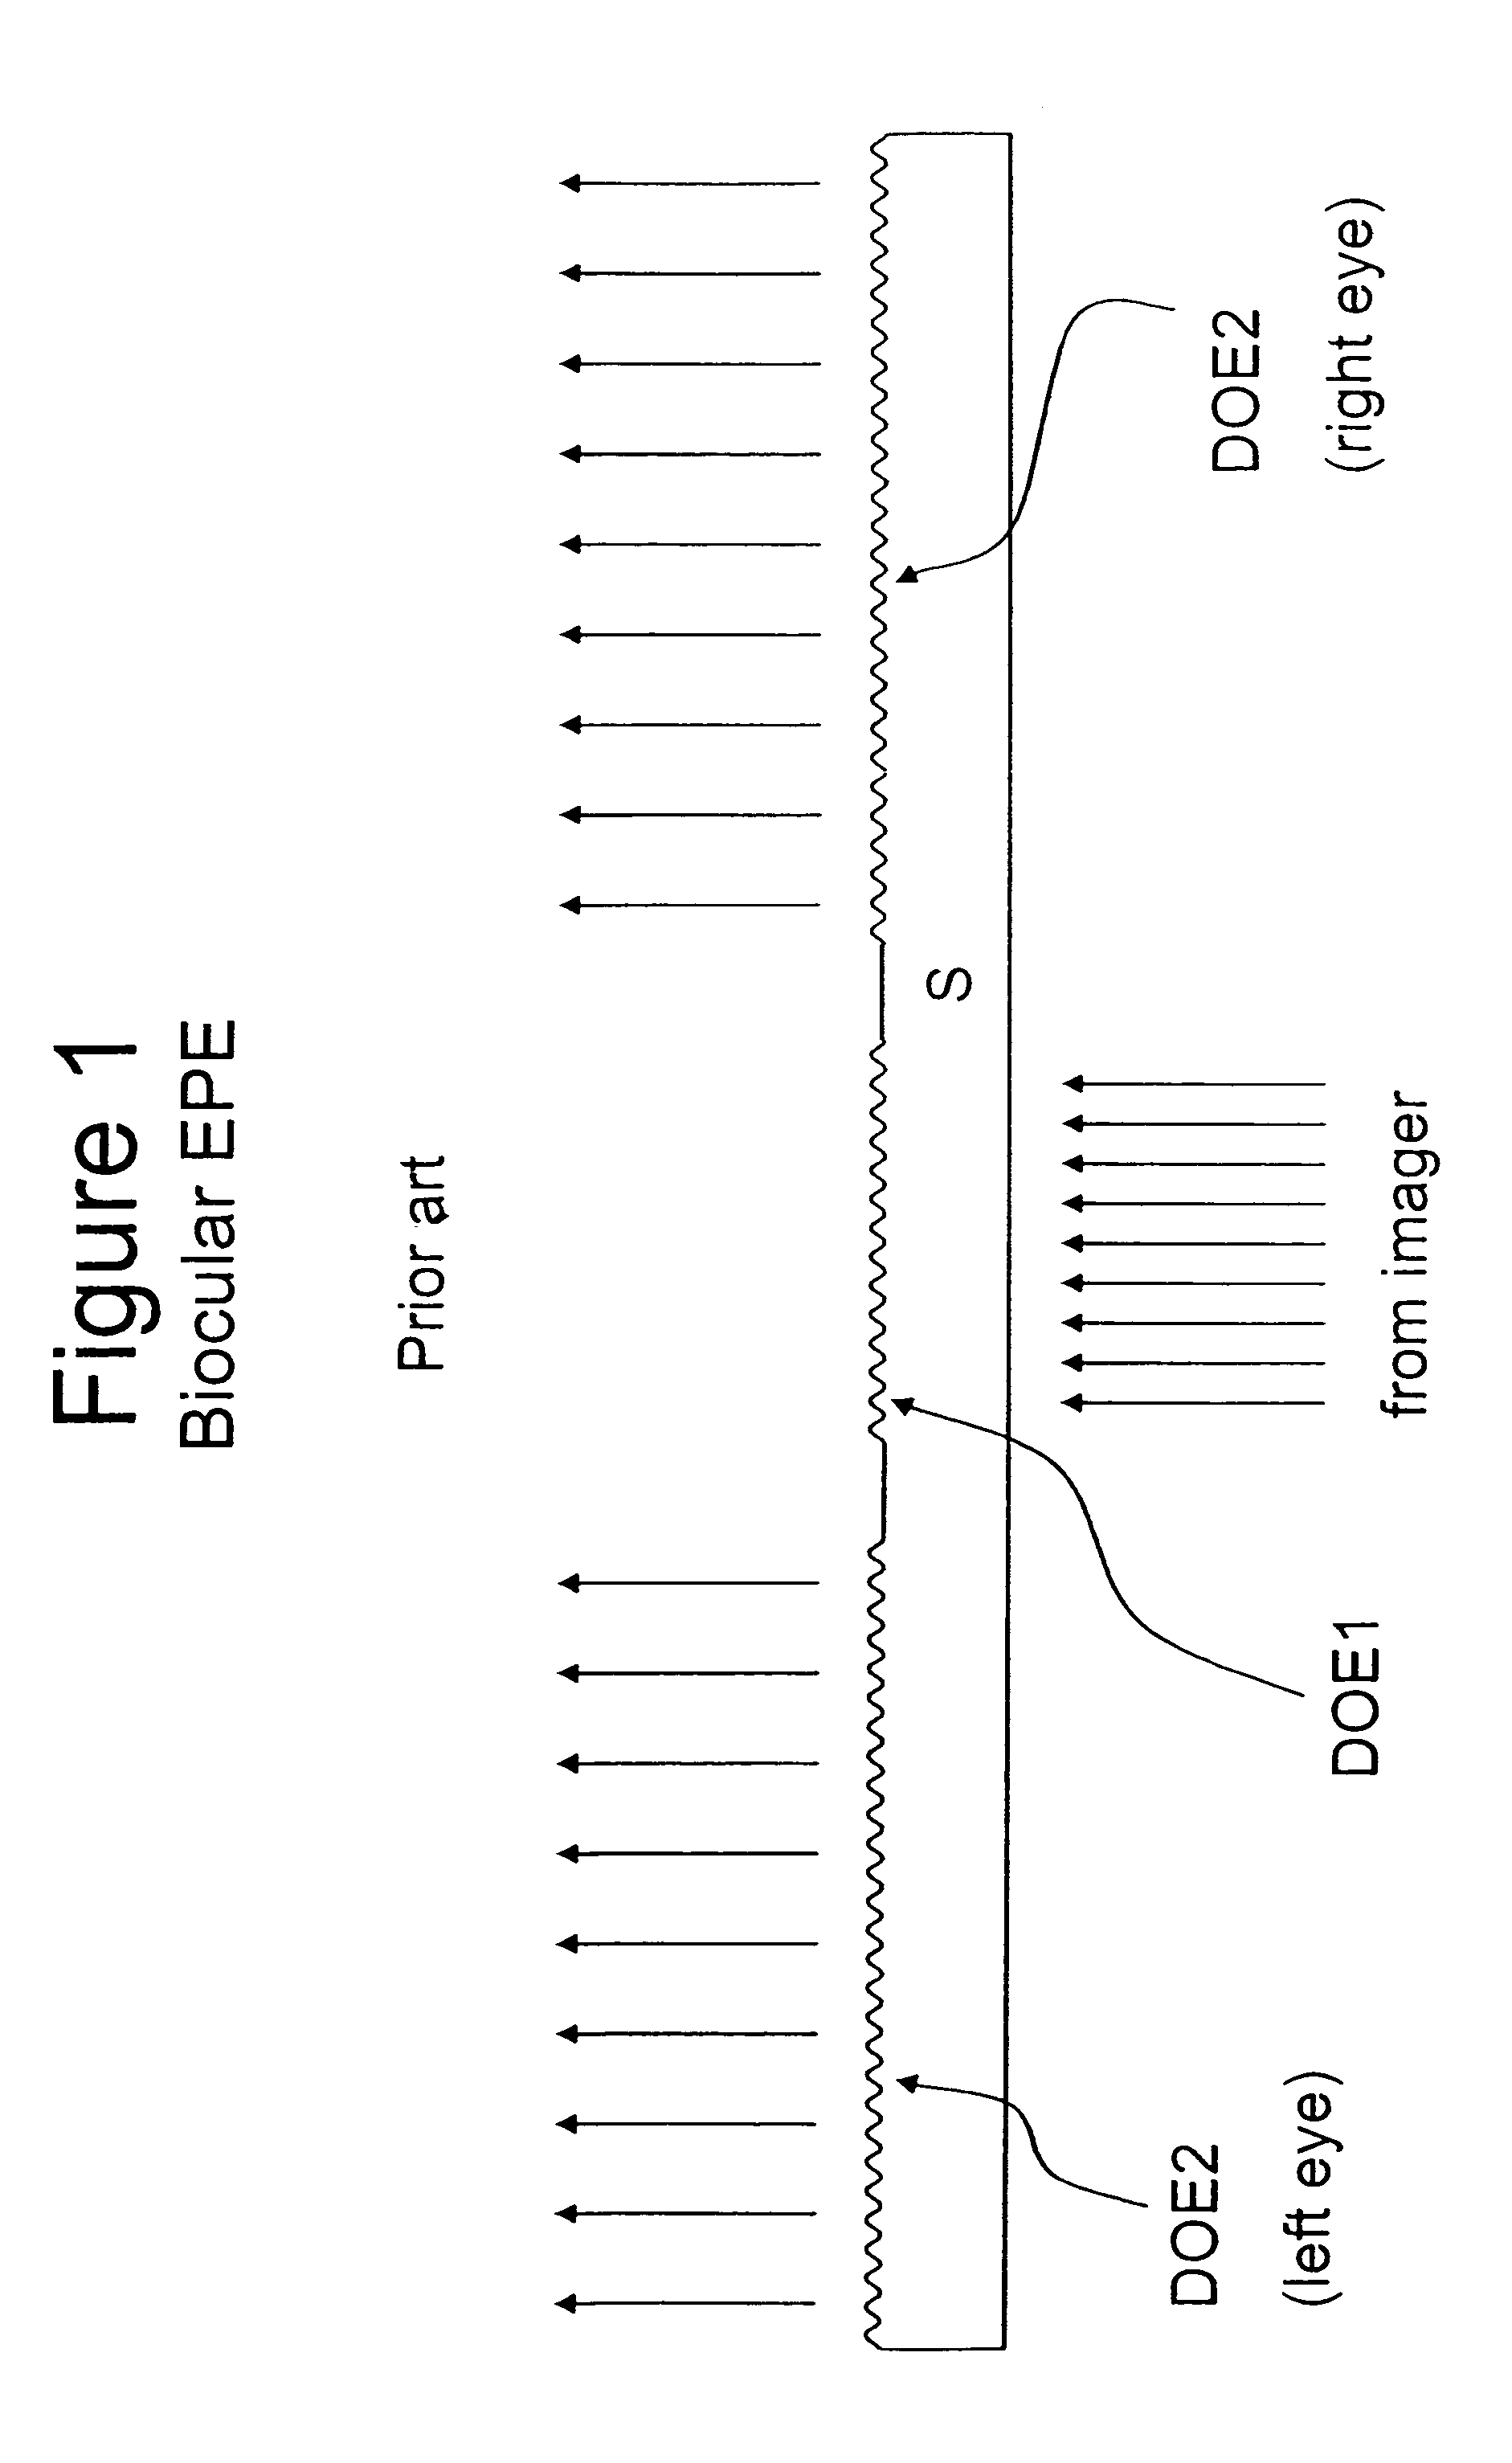 Diffractive grating element for balancing diffraction efficiency